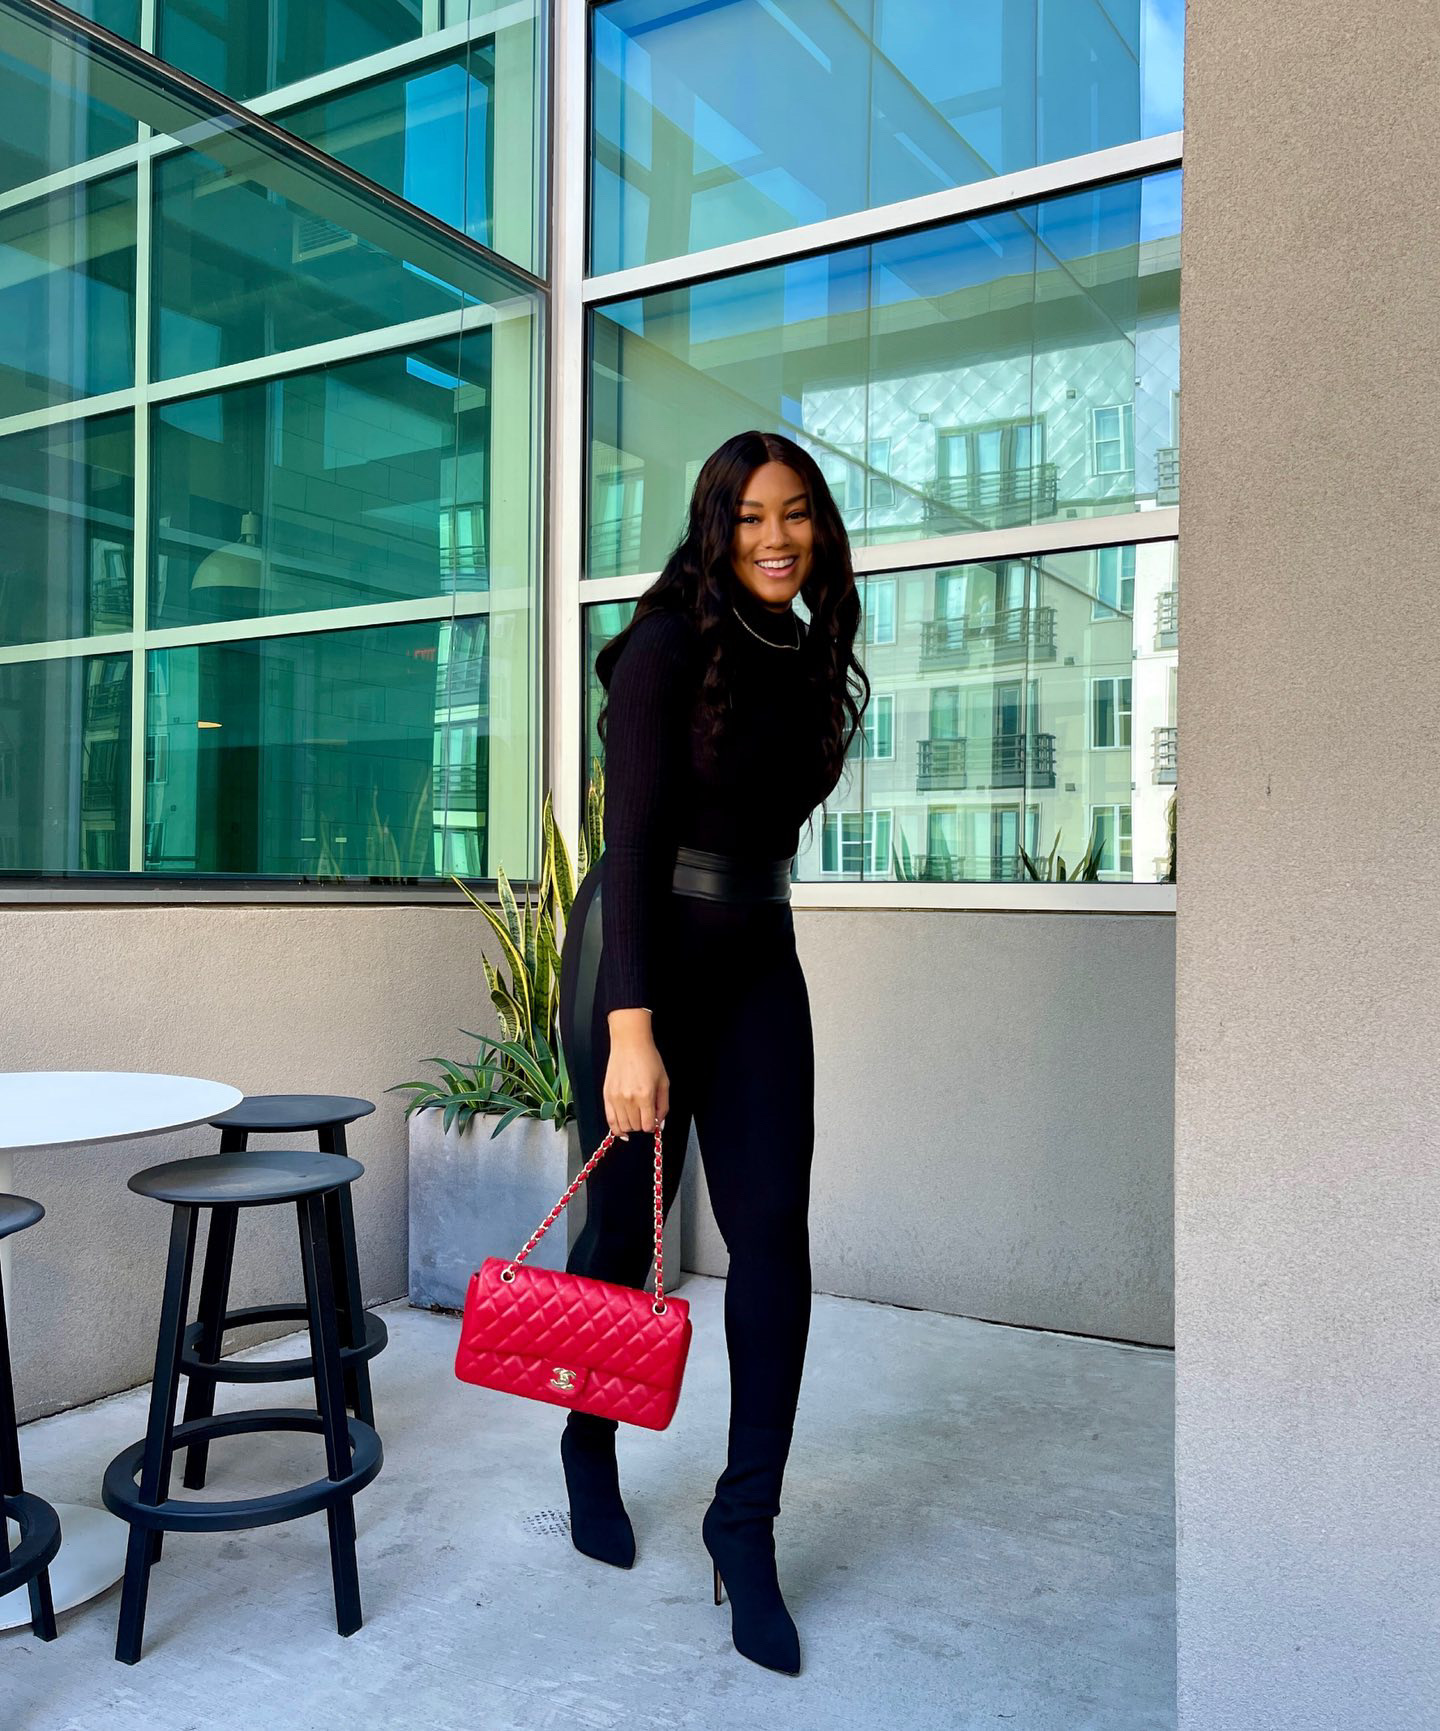 This ‘All Black Outfit with a Pop of Color’ is a Timeless Fall and Winter Trend